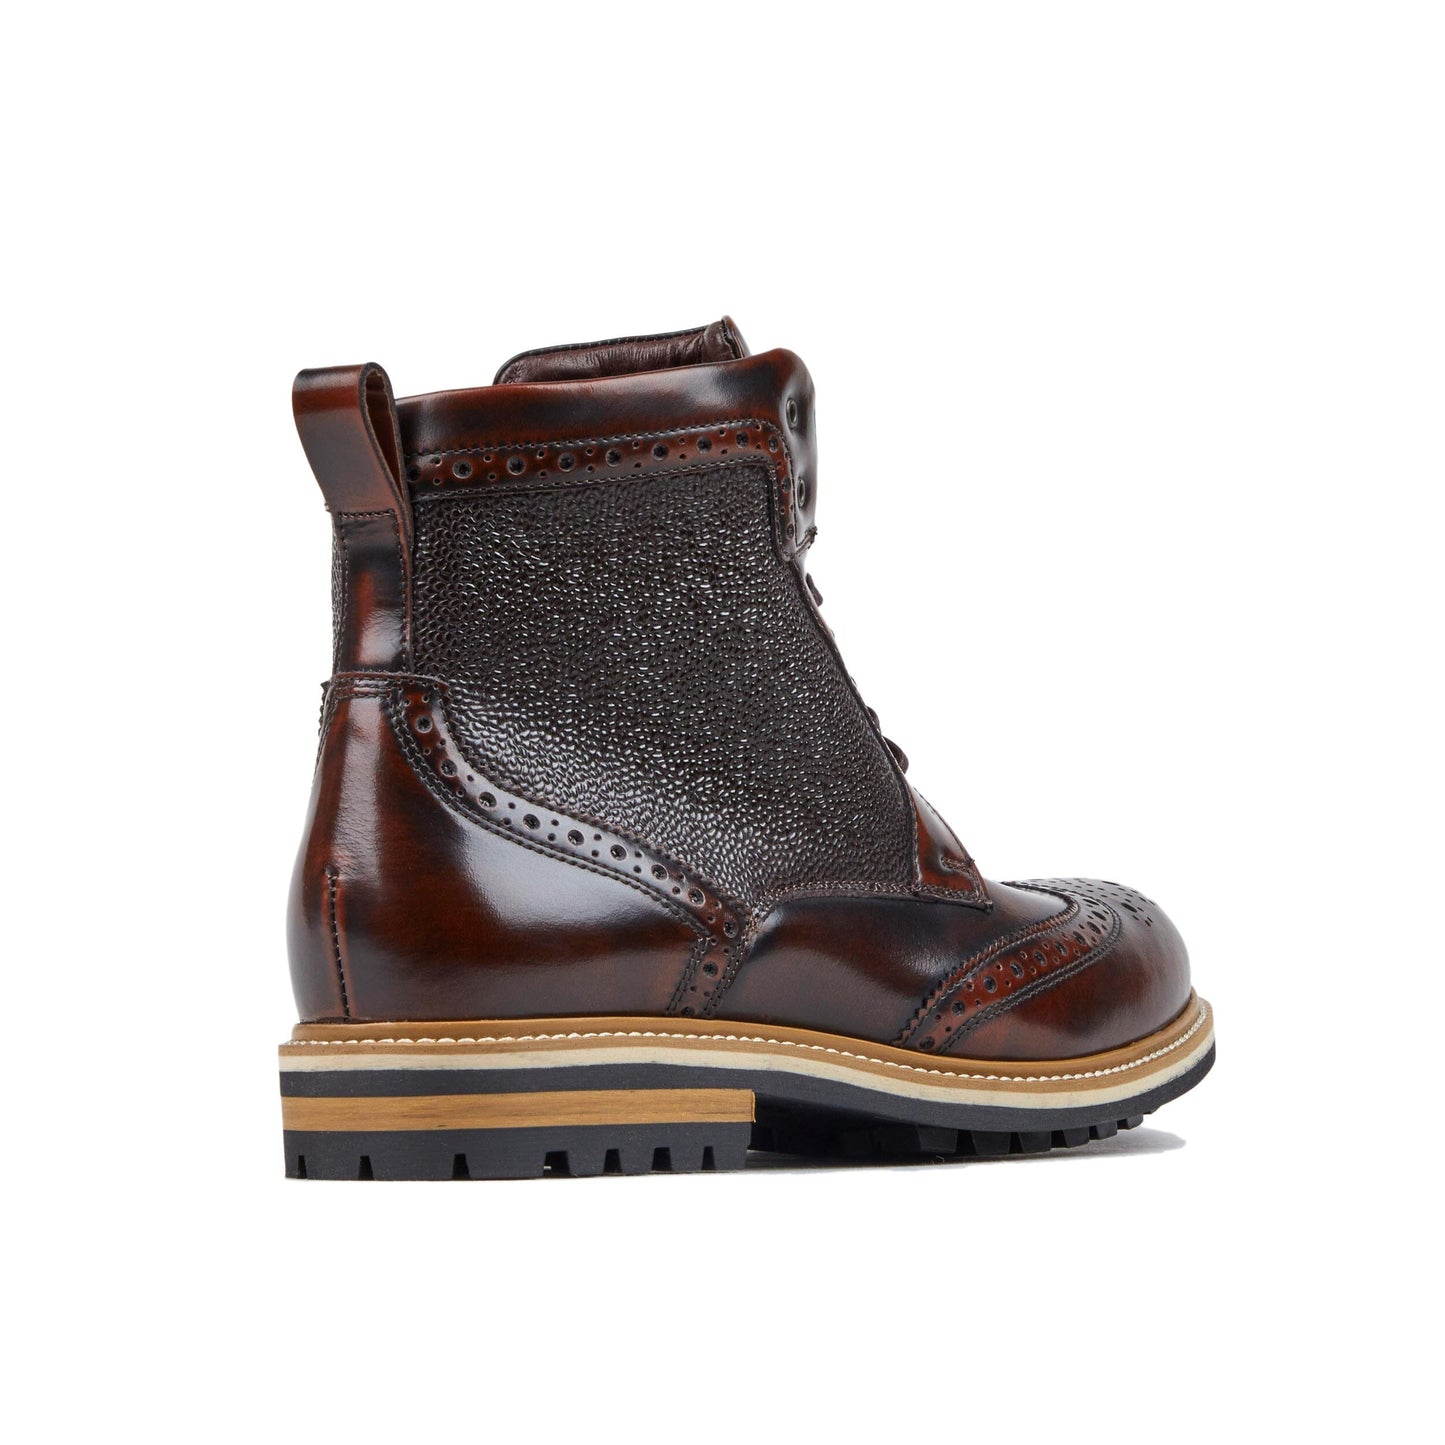 Wanderer - Deep Brown Ankle Boots Embassy London 